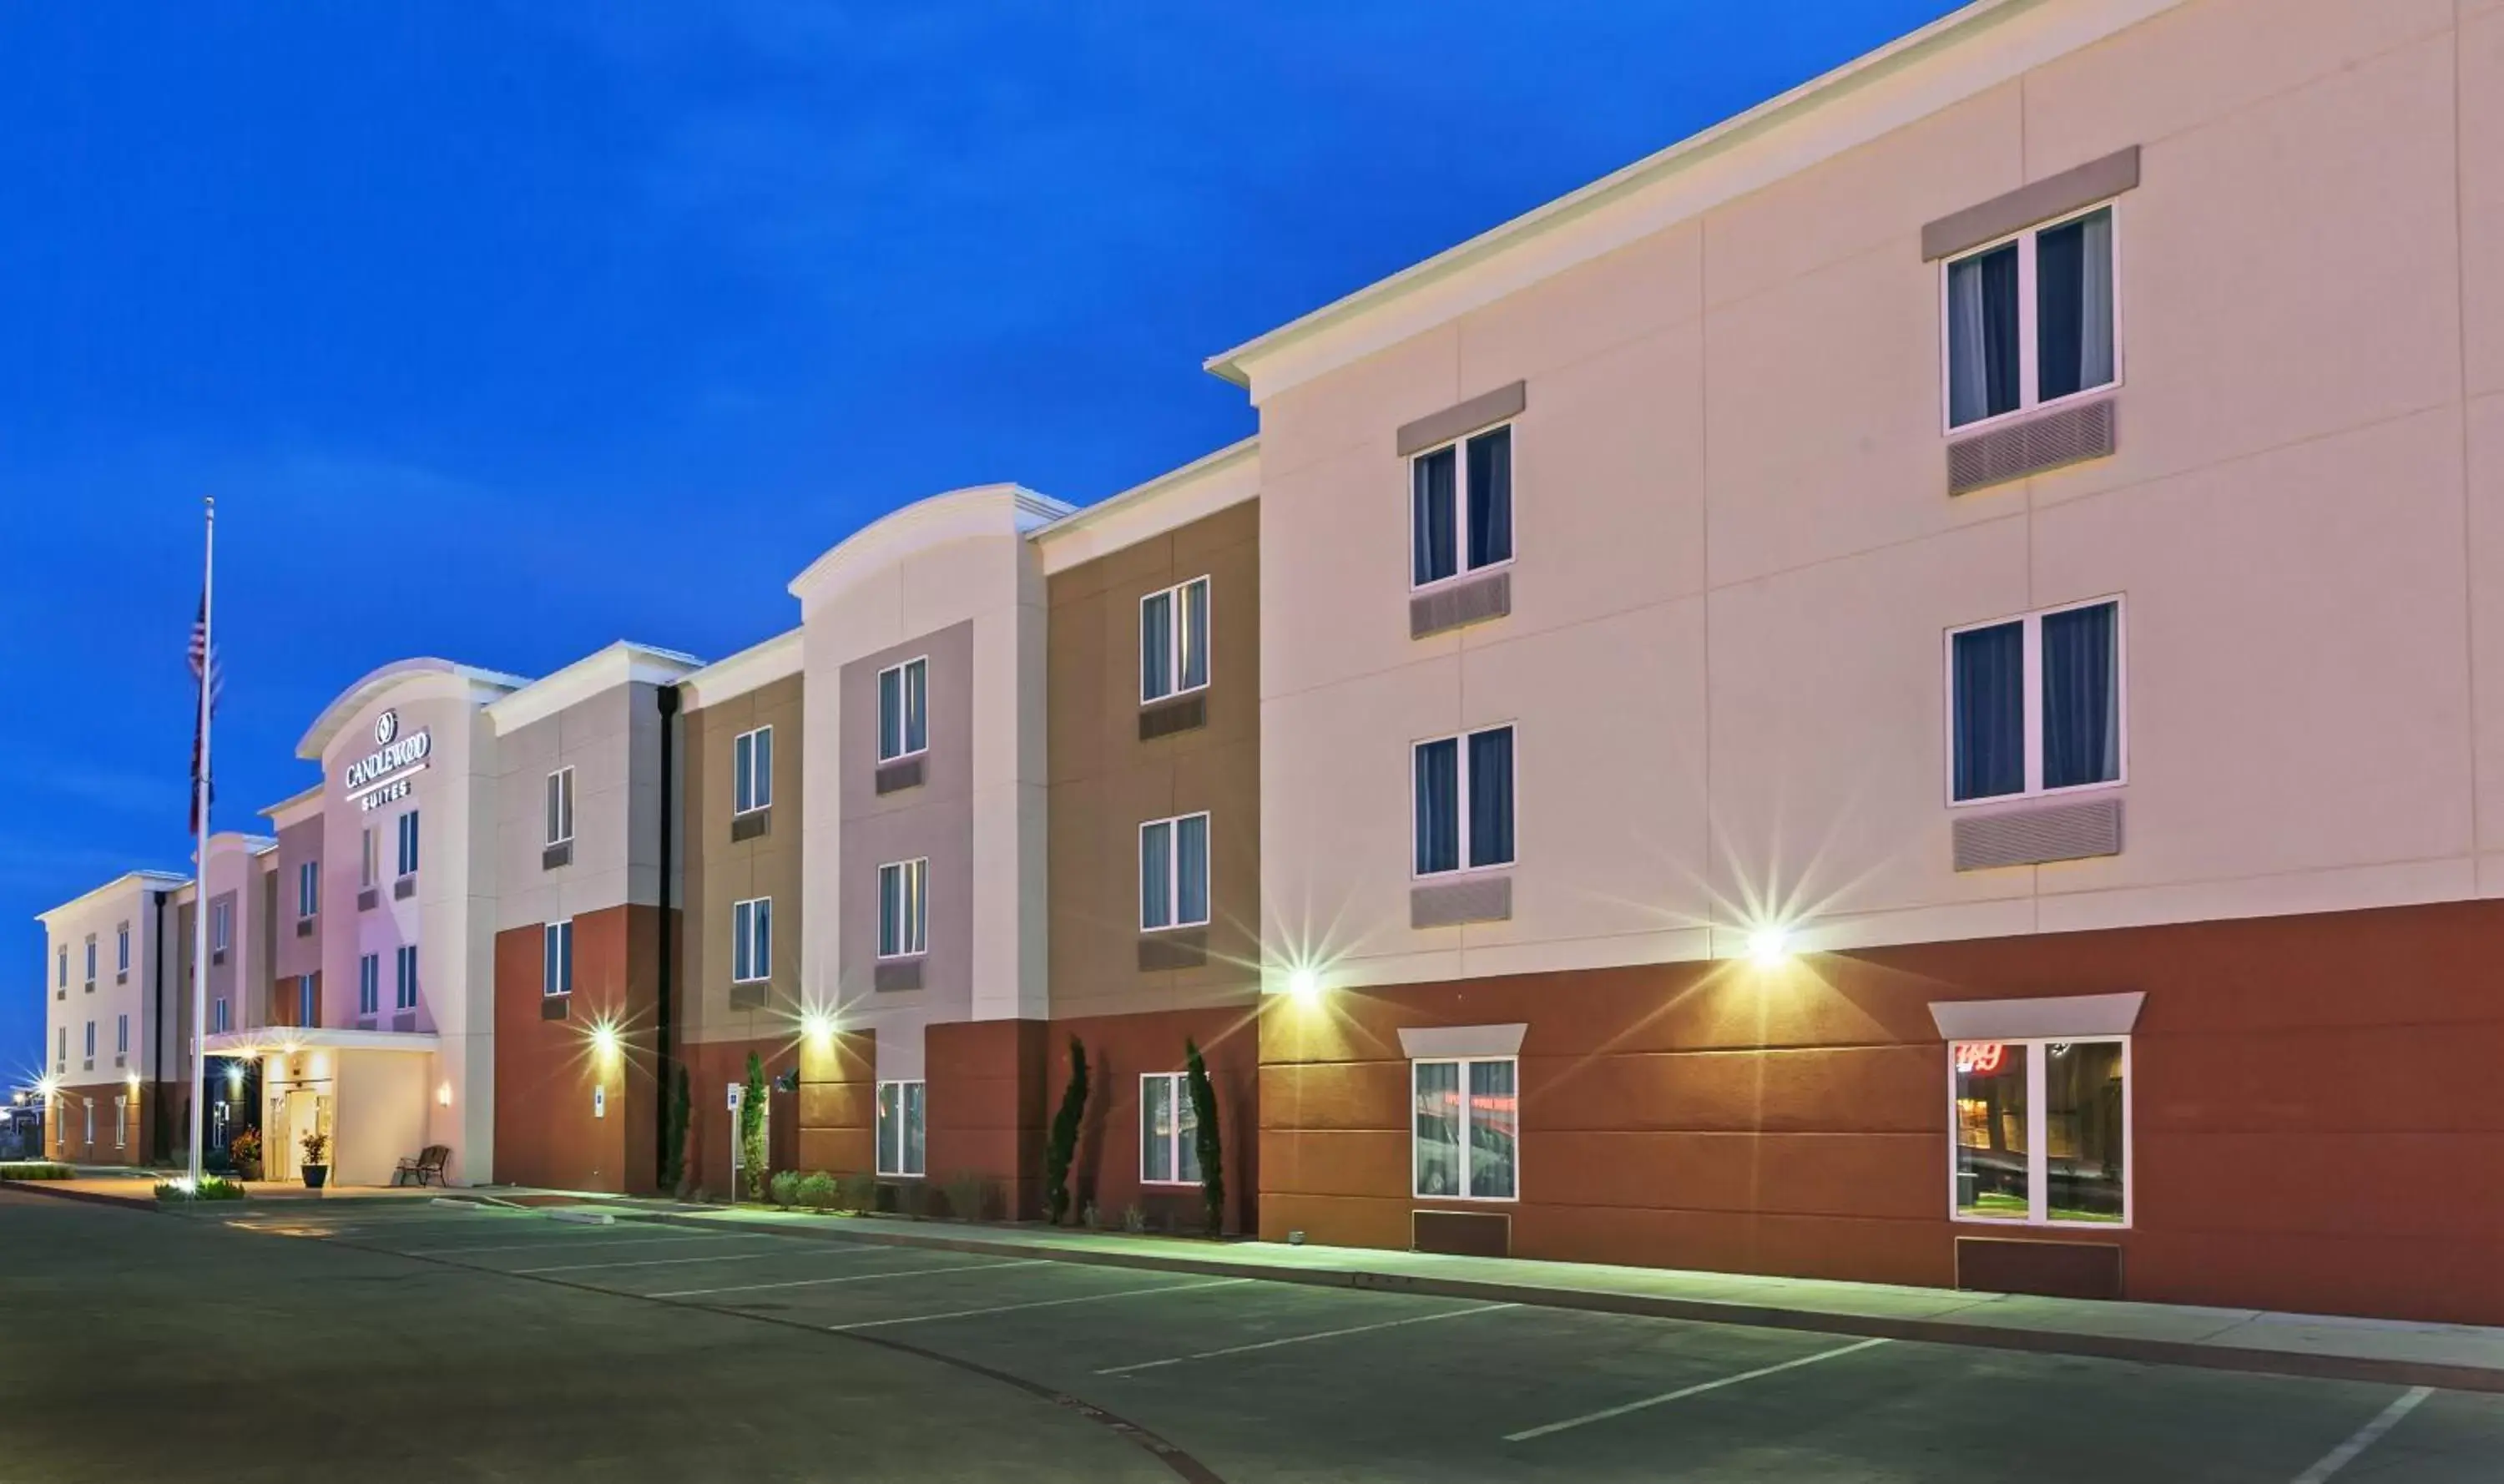 Property Building in Candlewood Suites San Angelo, an IHG Hotel